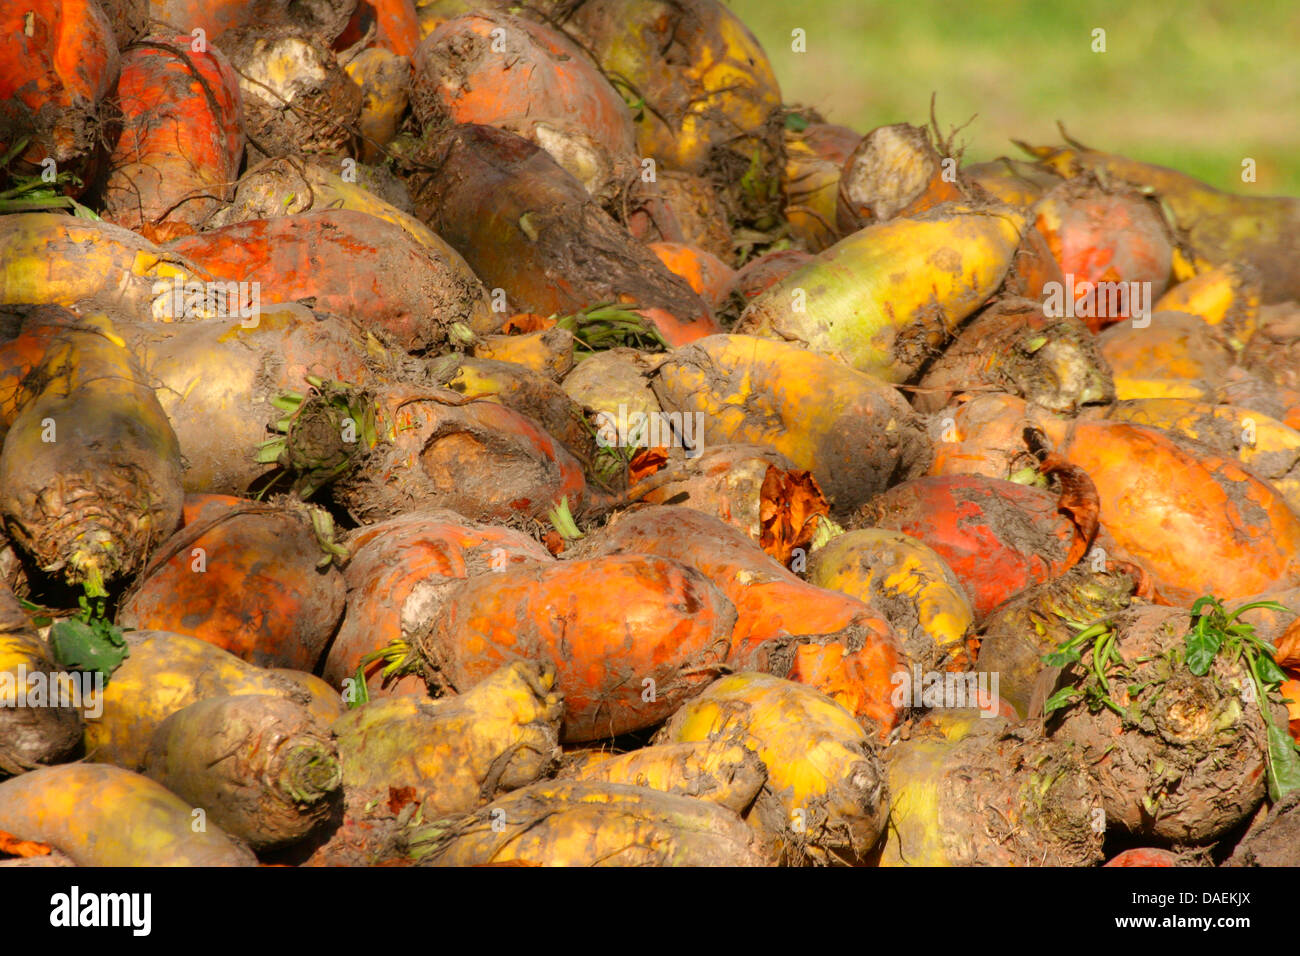 Beeds stock photo. Image of root, cook, group, heap, bulbous - 44477972